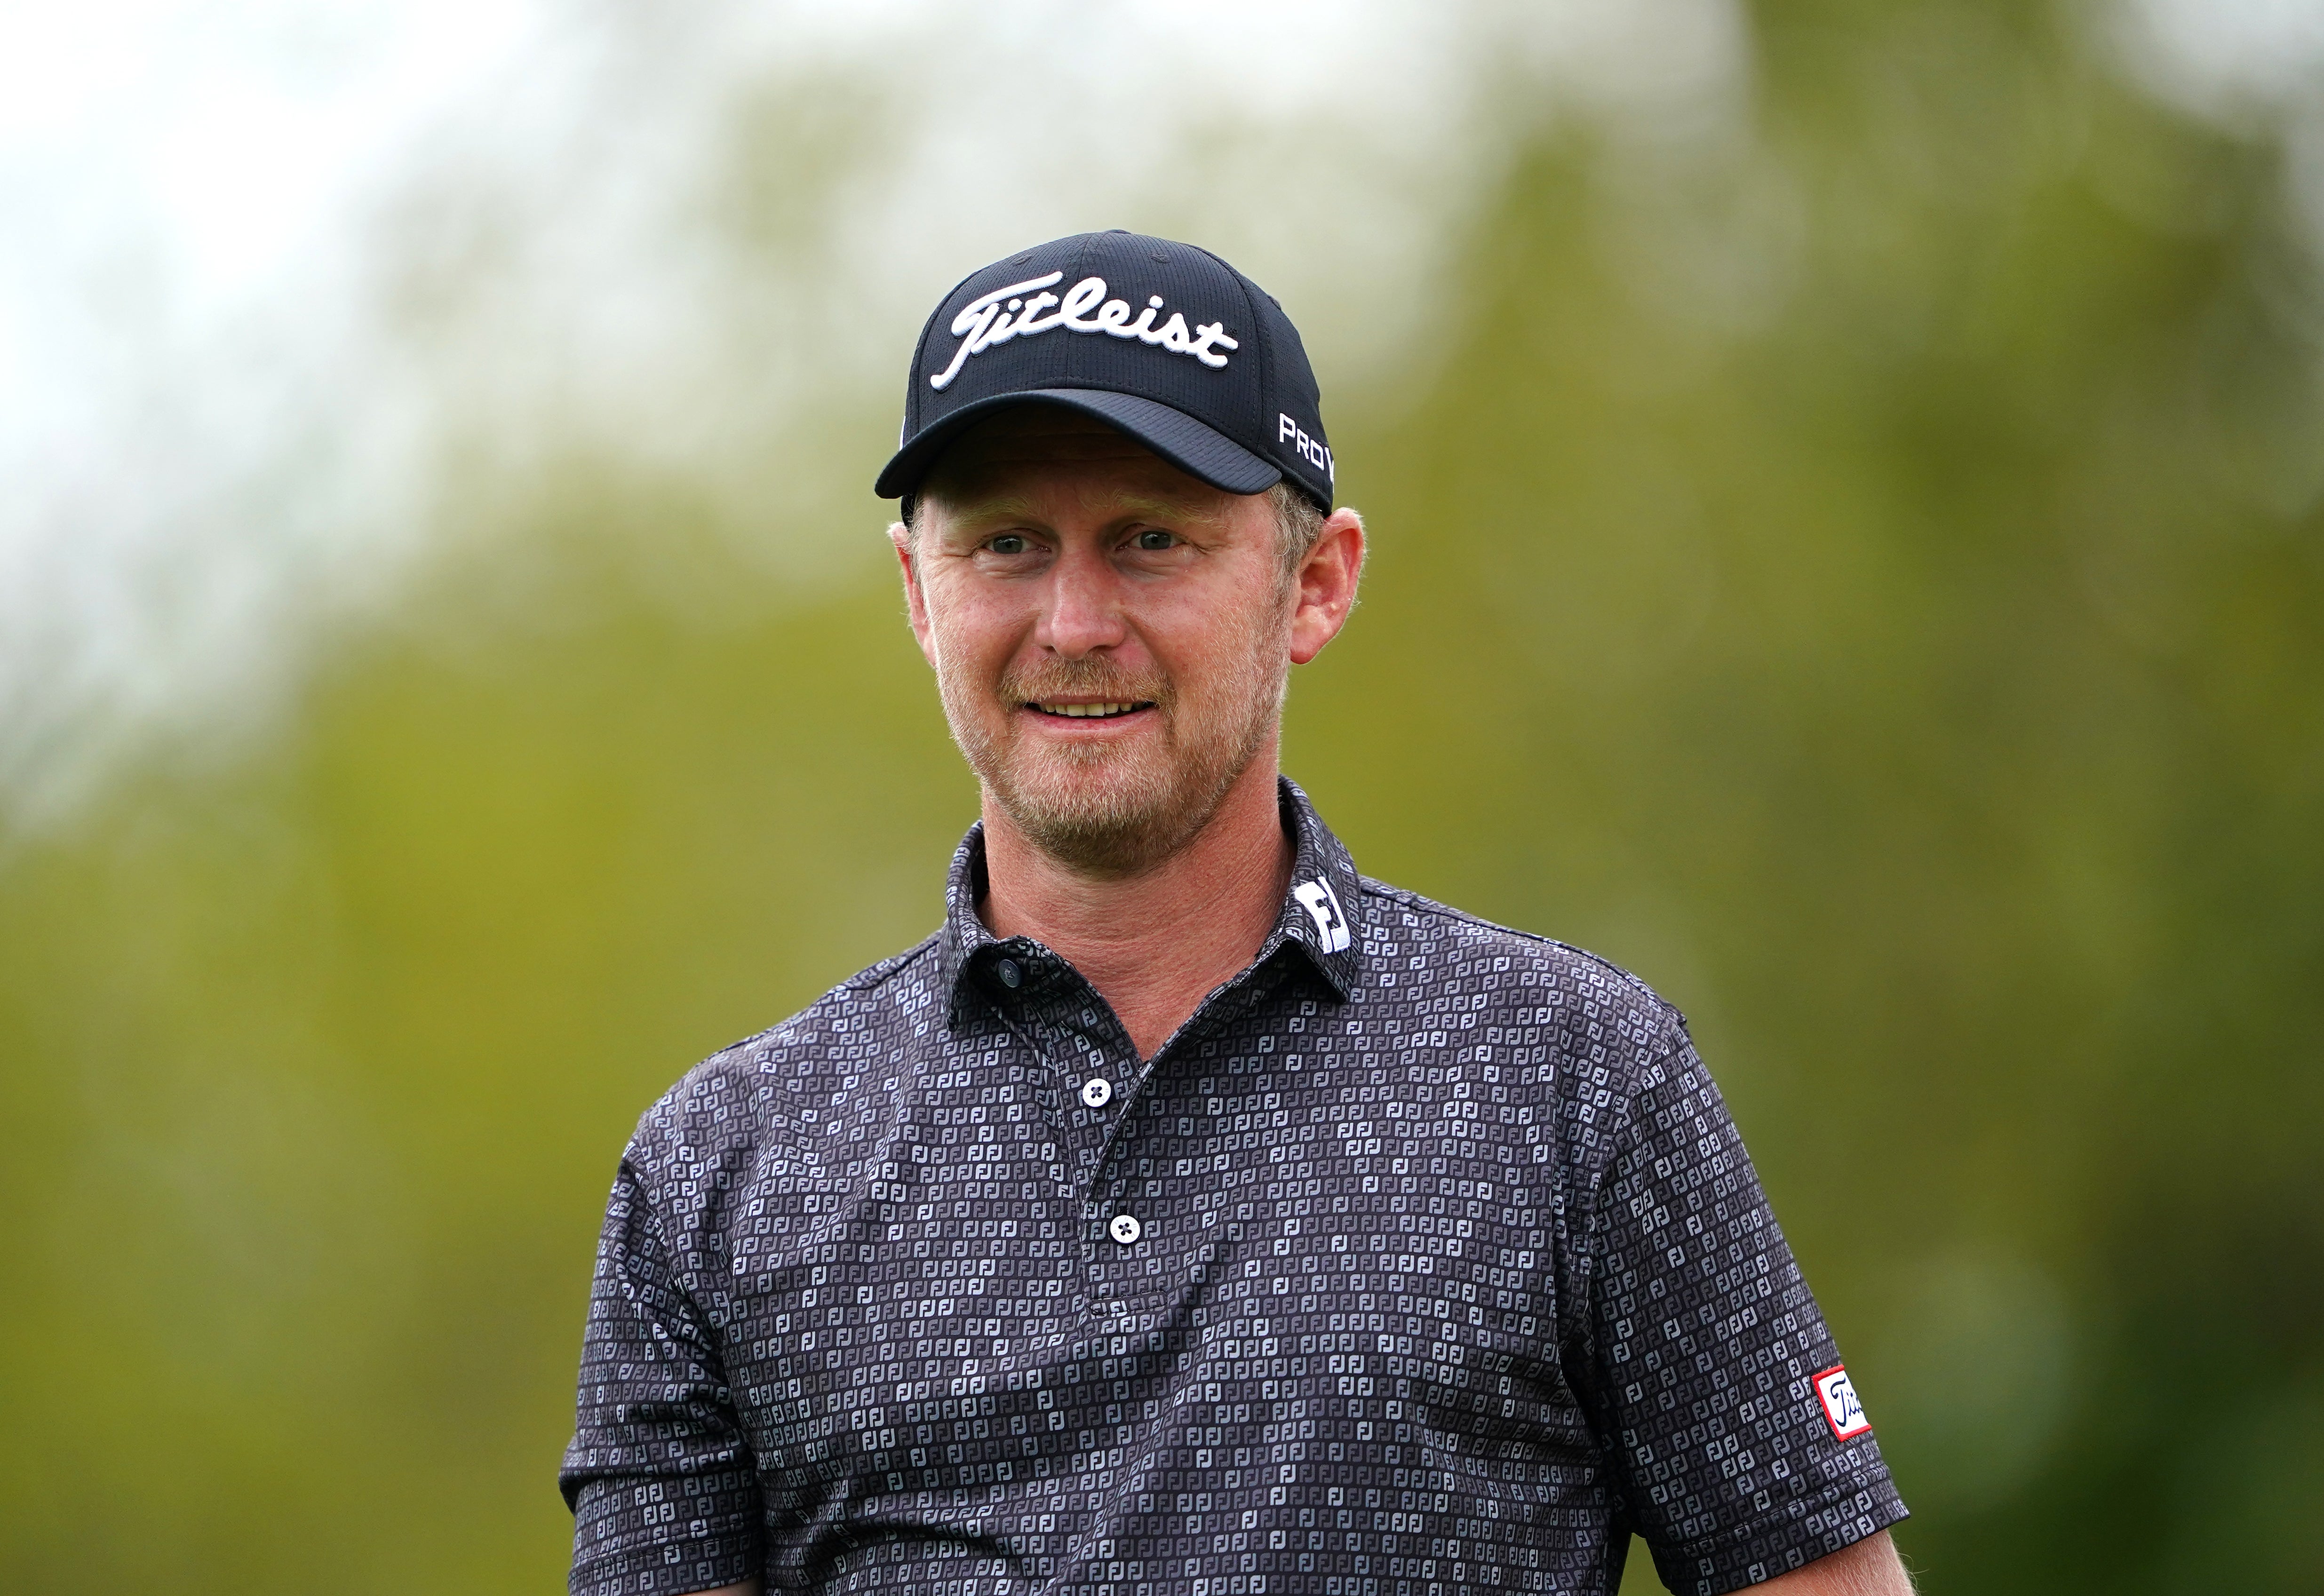 South Africa’s Justin Harding carded an opening 65 in the Genesis Scottish Open (Zac Goodwin/PA)